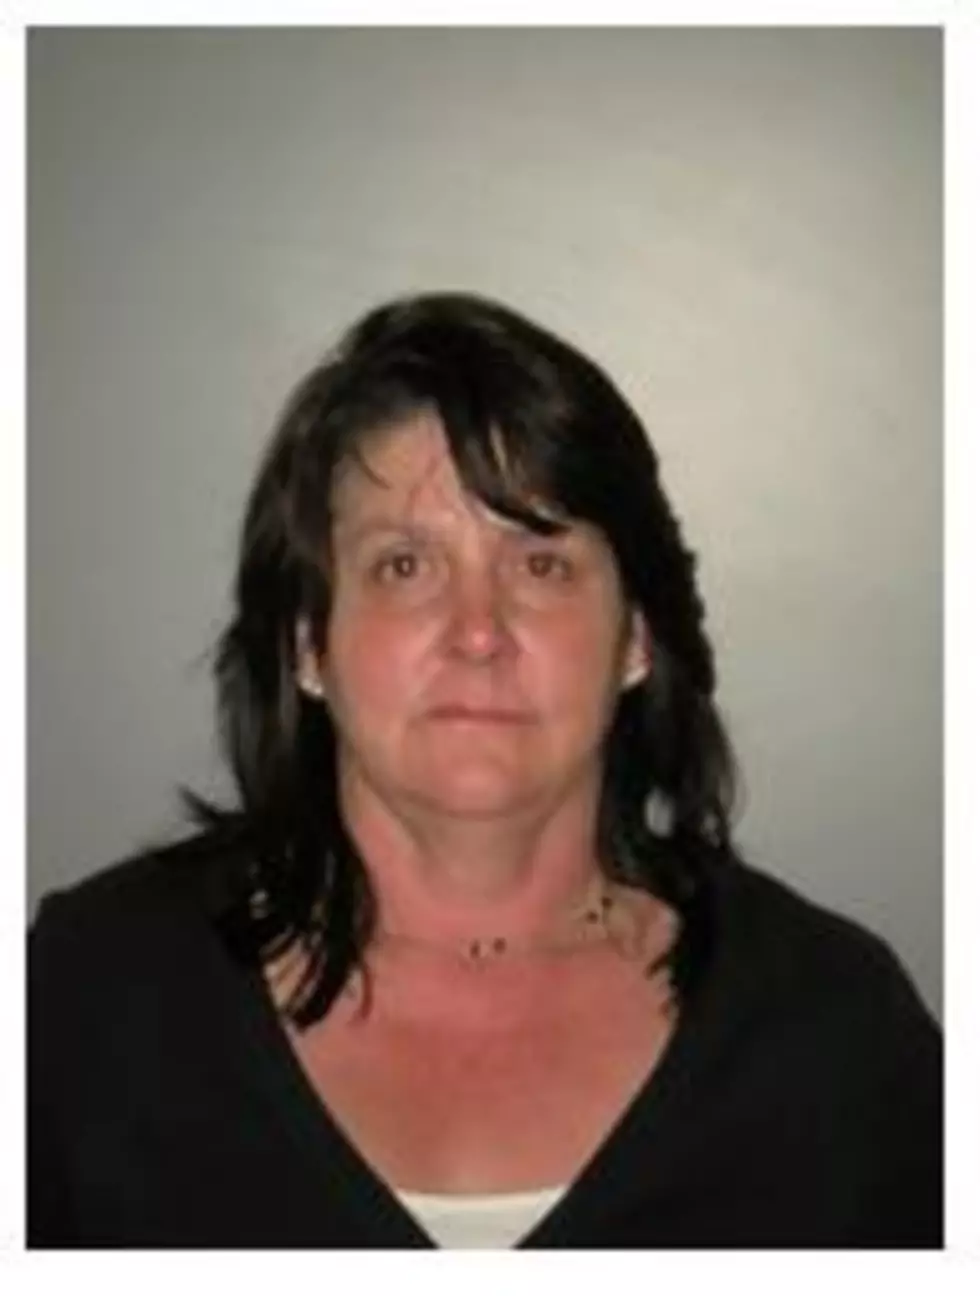 Oswego Woman Racks Up 3 DWI Charges In 3 Months